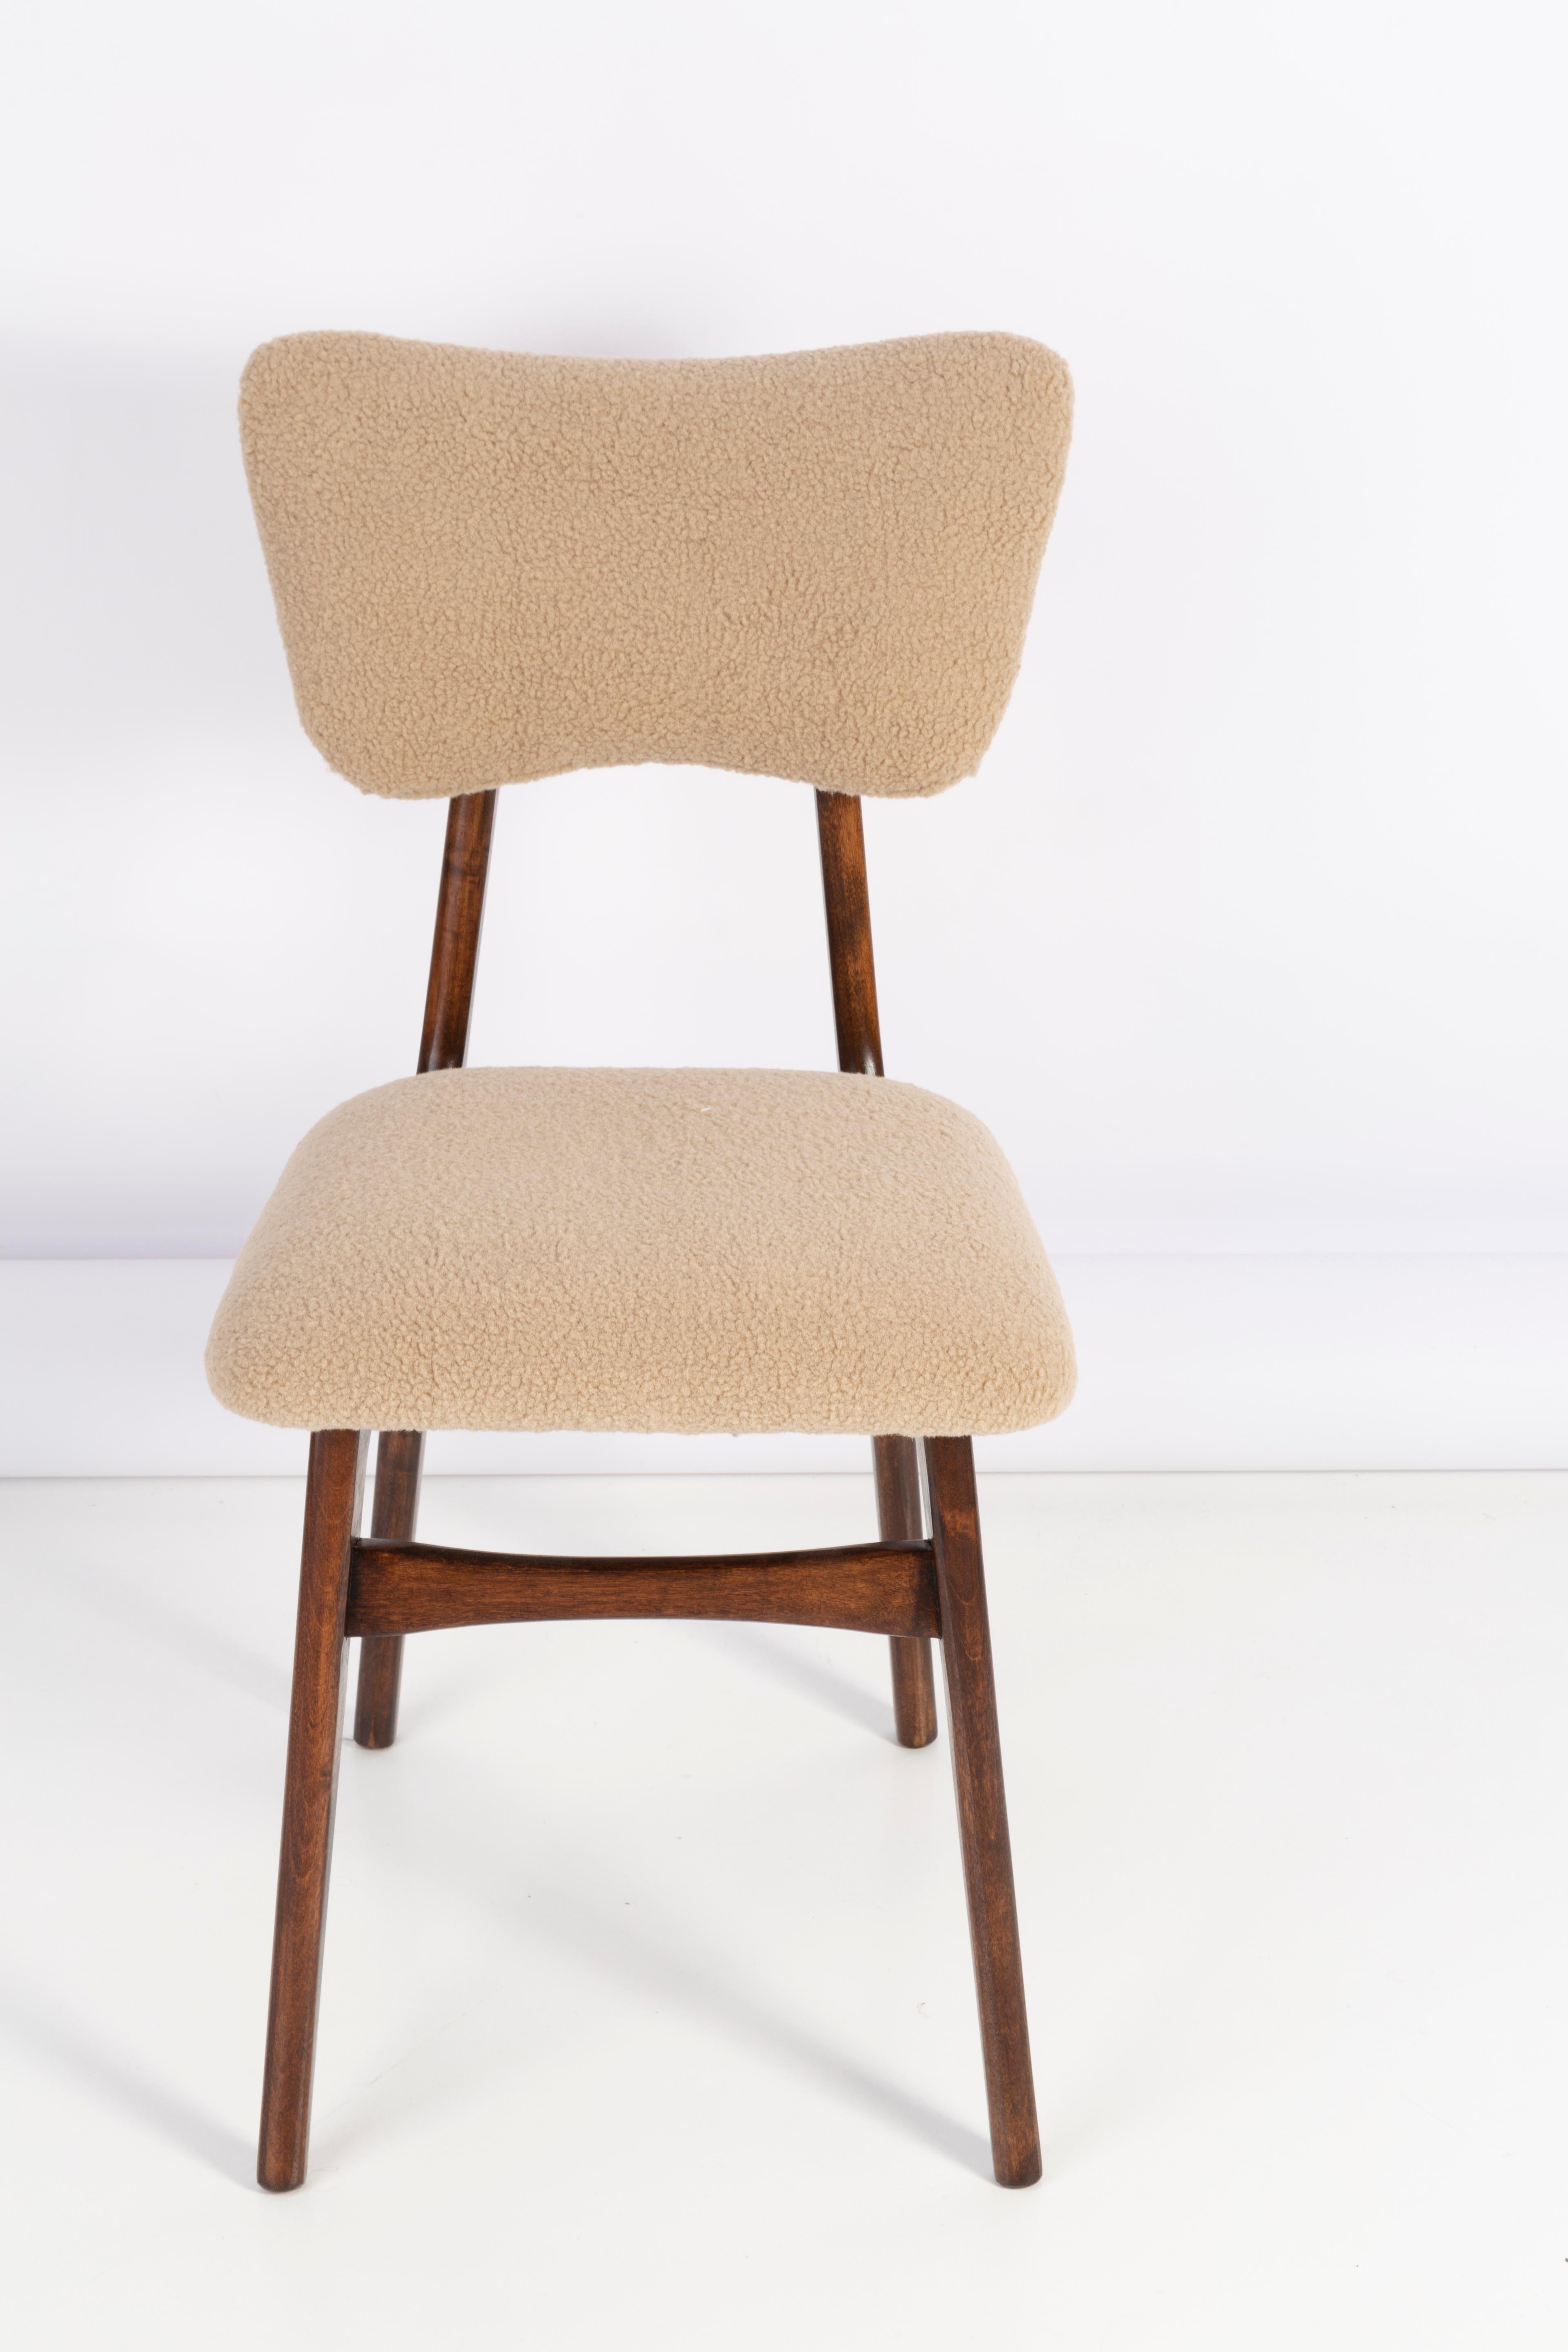 Set of Twelve 20th Century Camel Boucle Chairs, 1960s For Sale 8